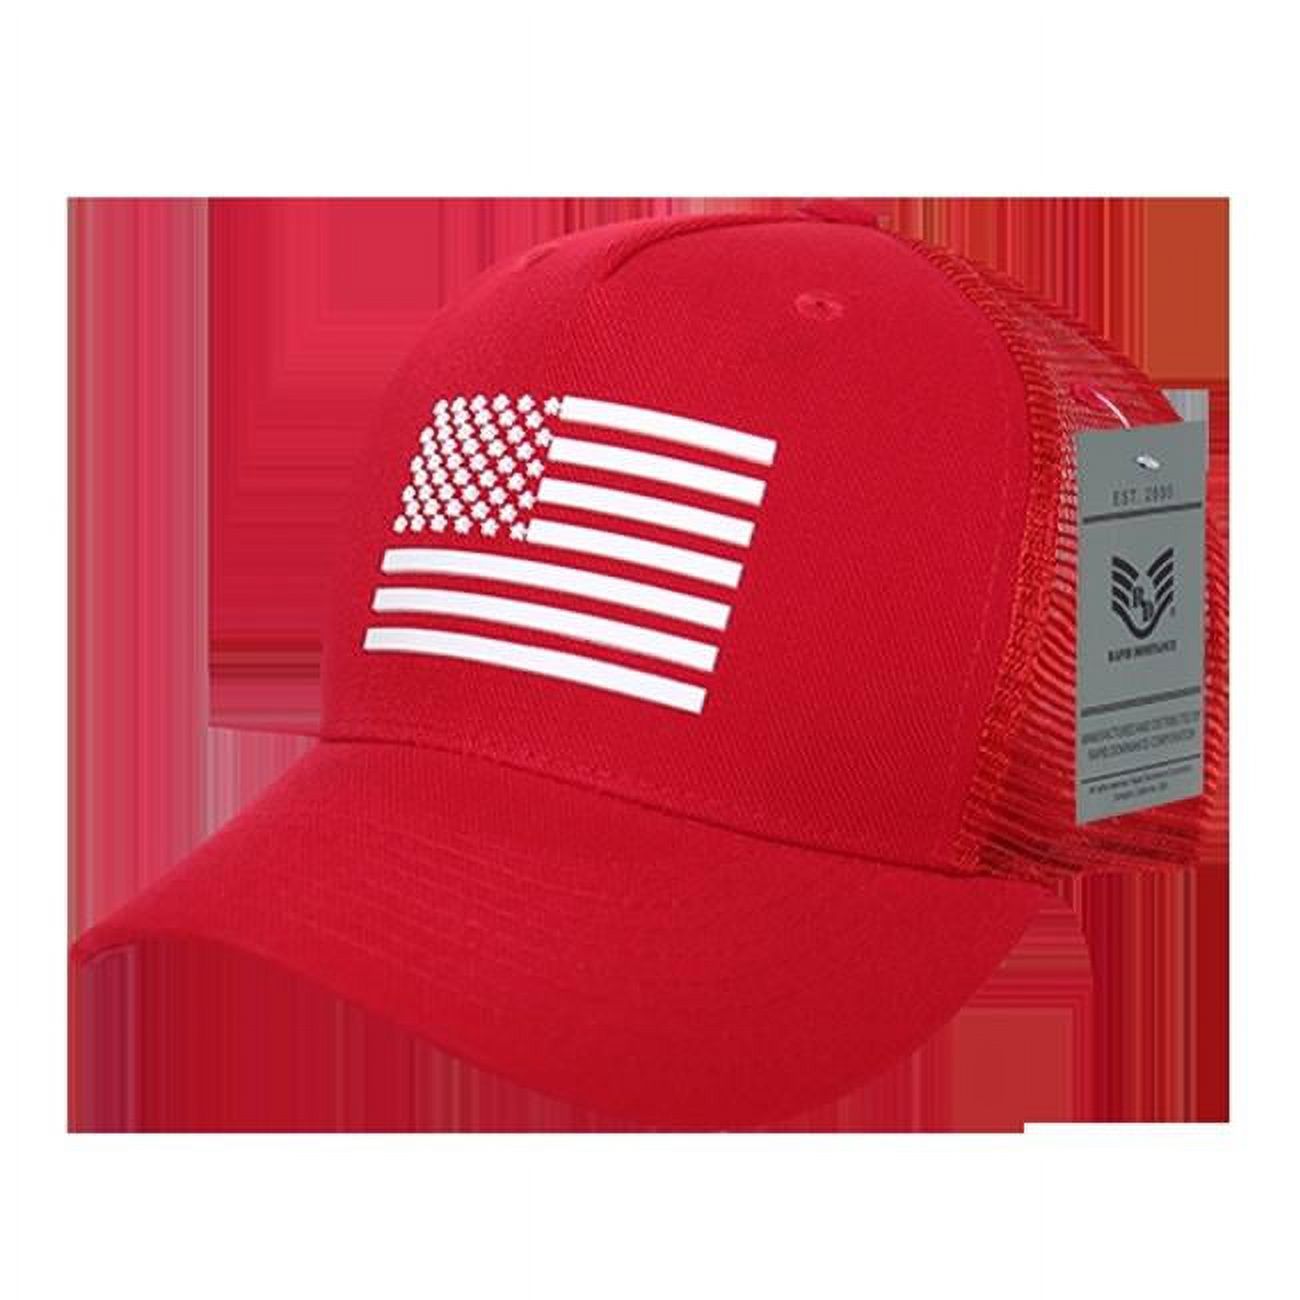 Rapid Dominance A12-USA-RED 5 Panel Trucker Cap - Red&#44; Rubber US Flag - image 1 of 4